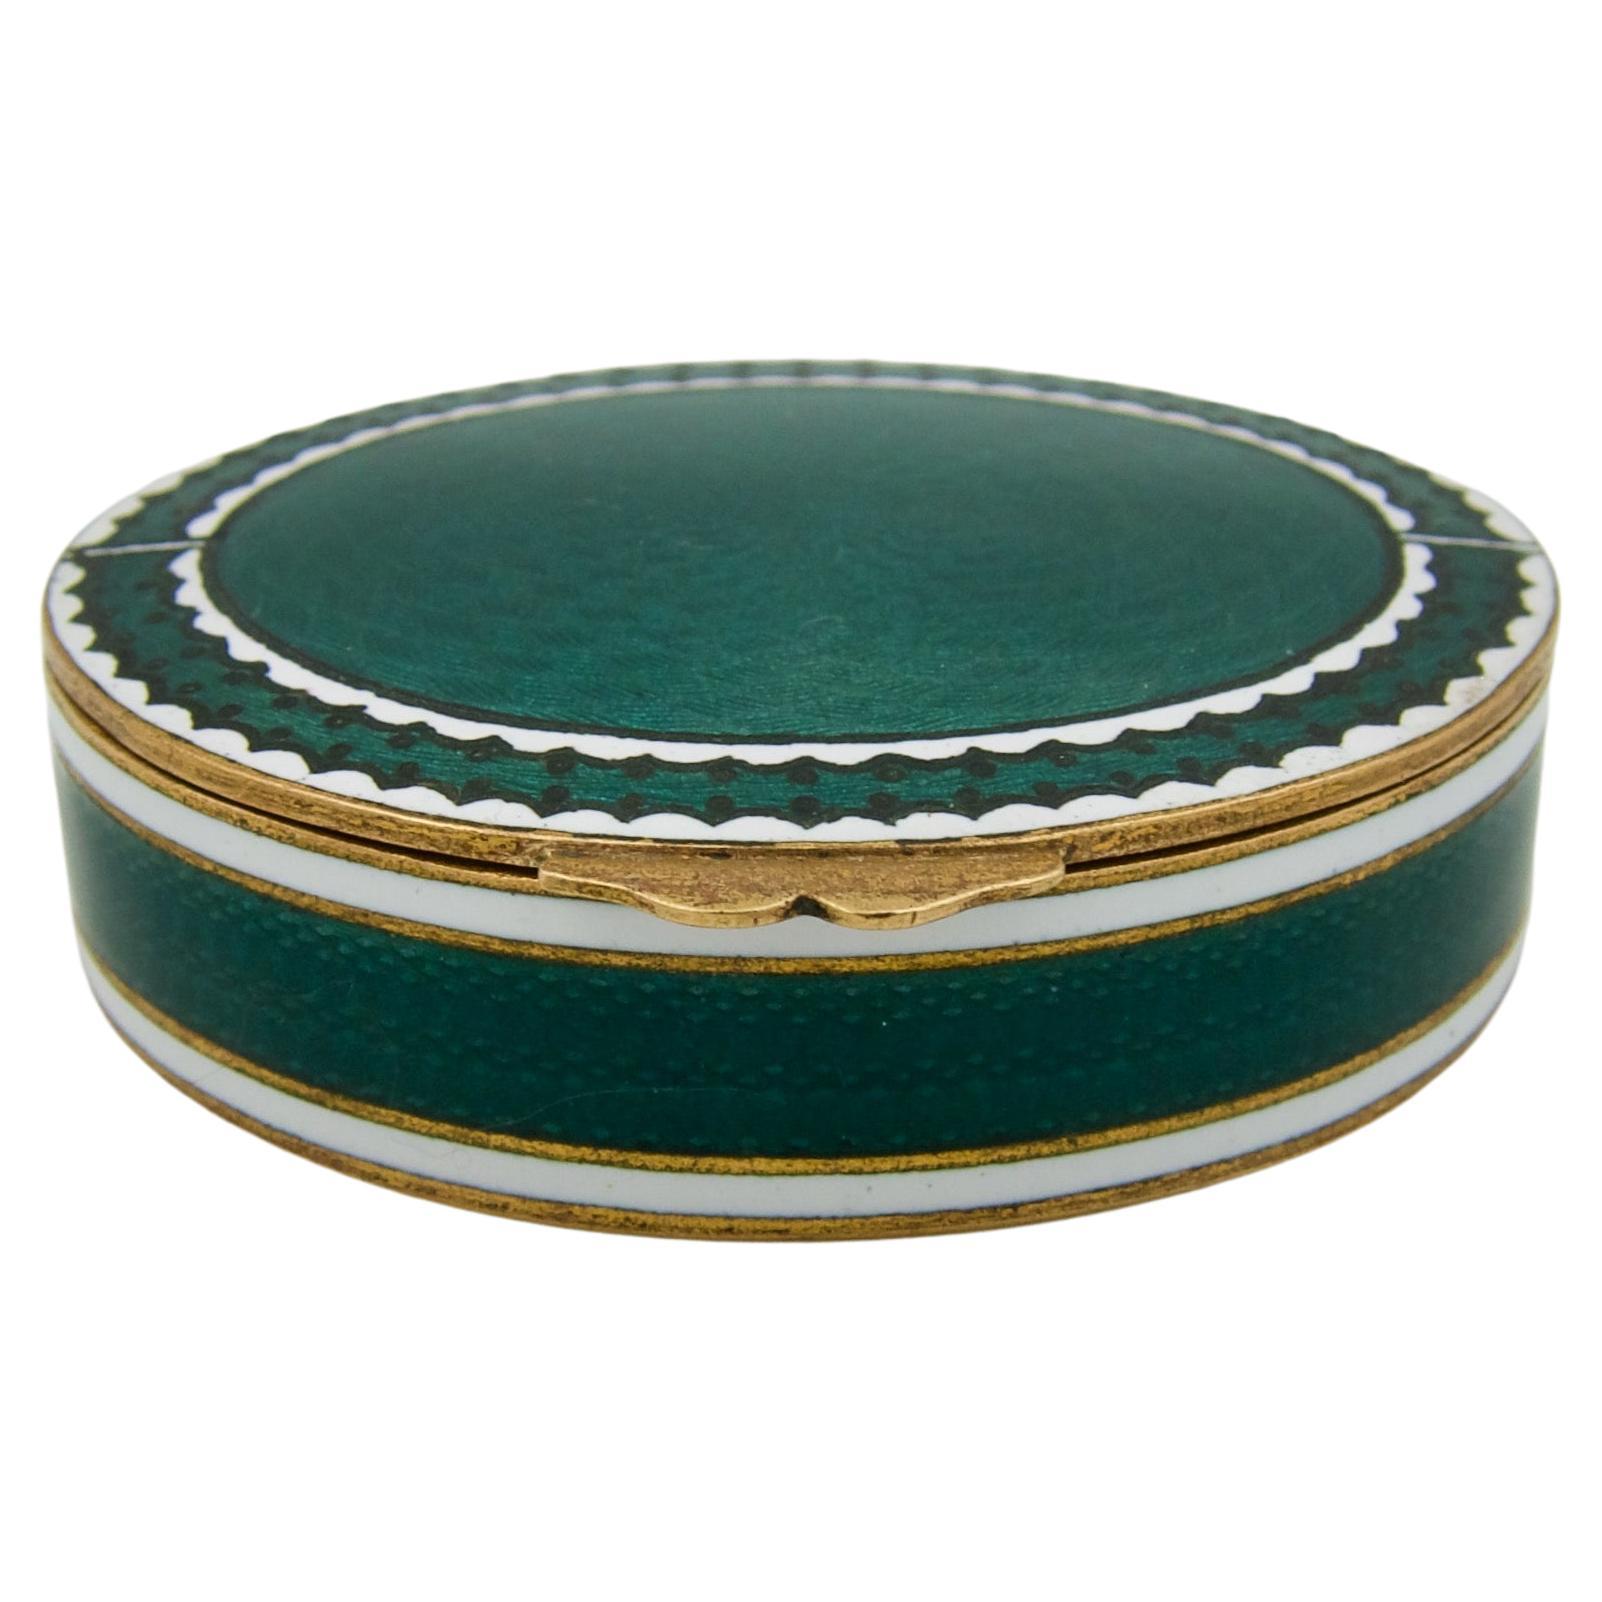 Antique Gilt Metal and Guilloche Enamel Snuff or Pill Box